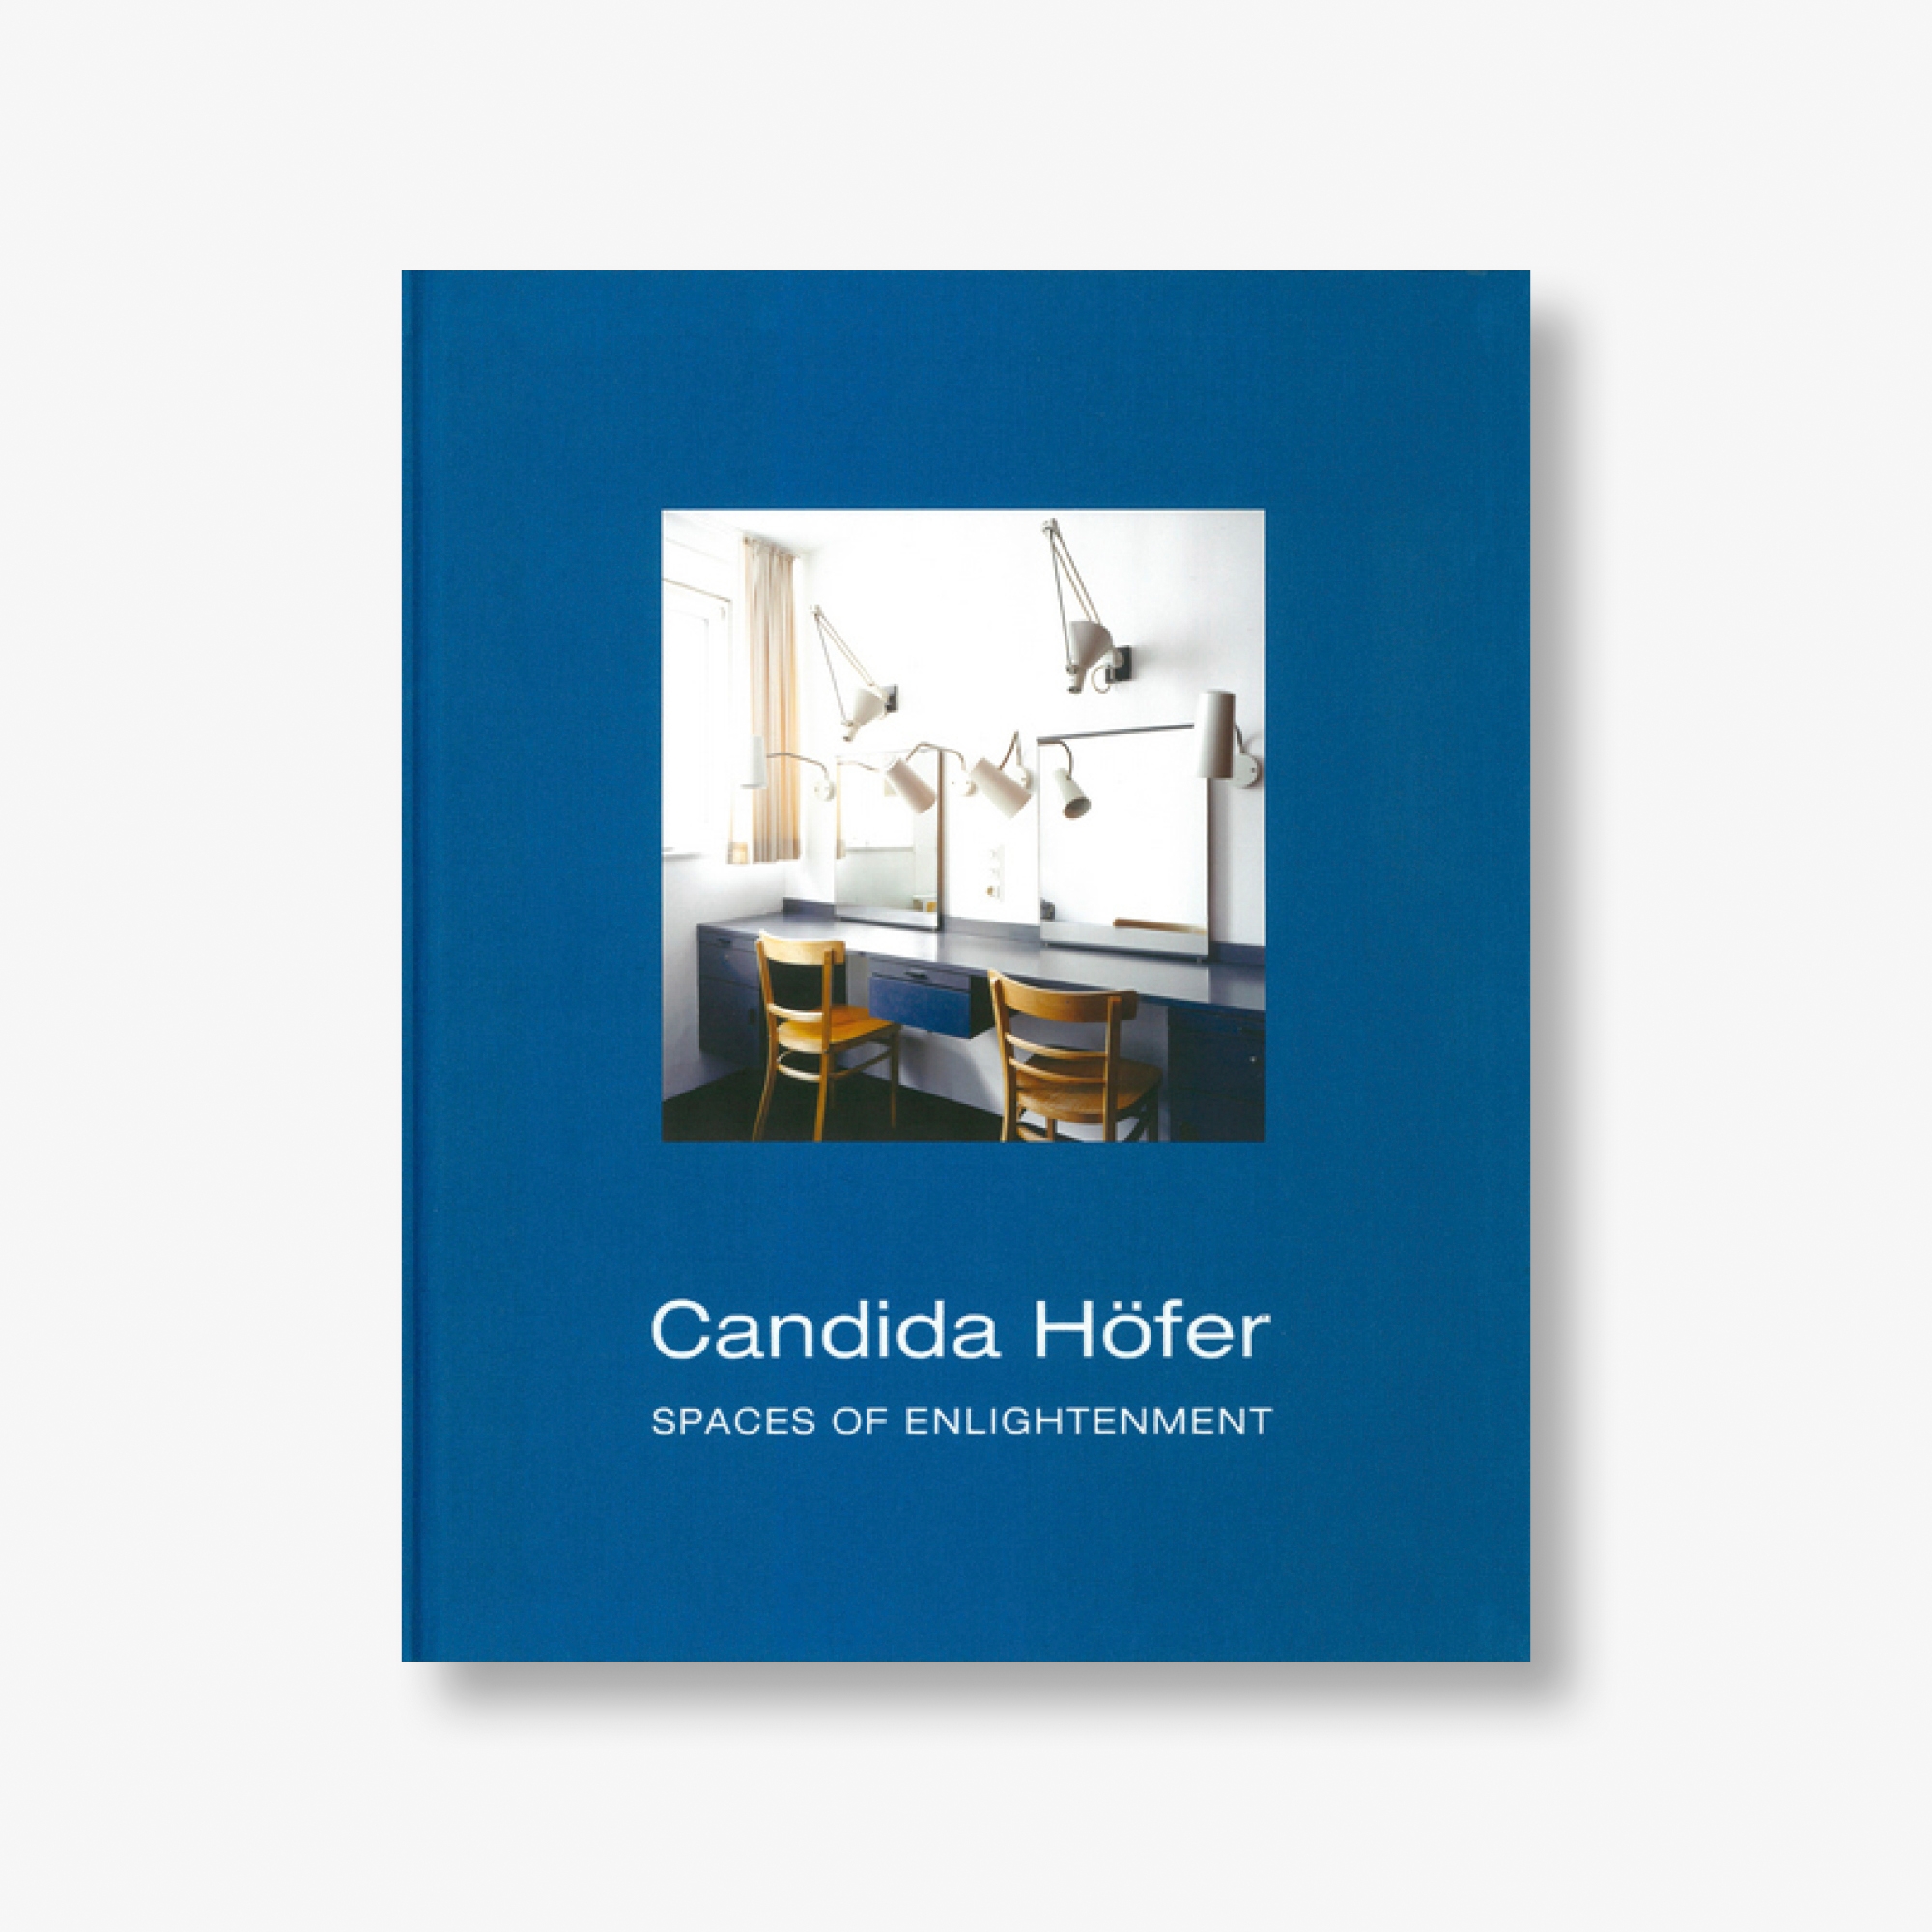 Candida Höfer: SPACES OF ENLIGHTENMENT